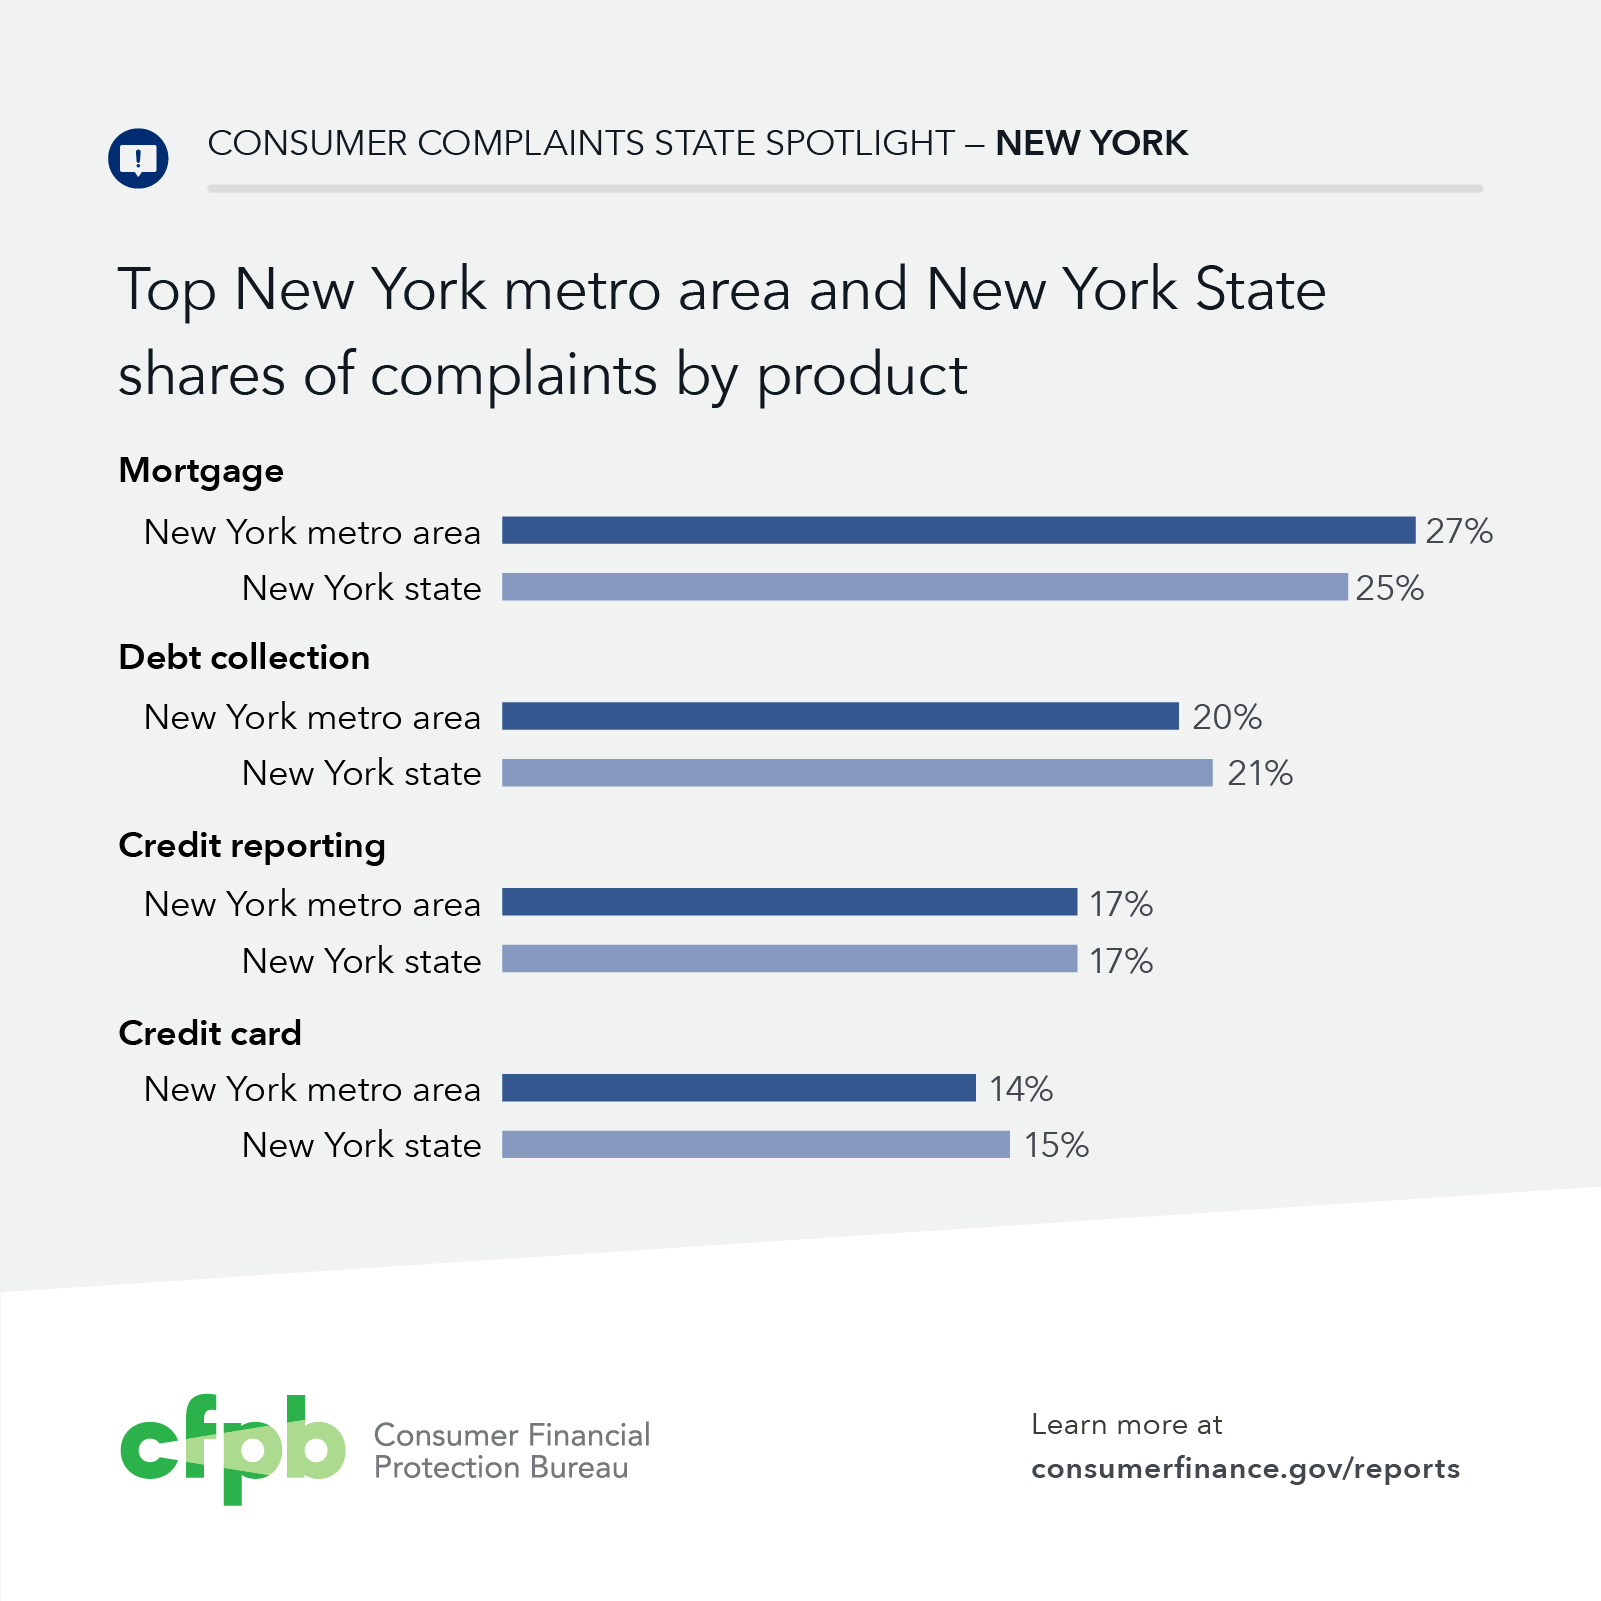 Bar chart using subsets and relationships in color for financial marketplace complaints in both New York state and the smaller New York metro area.